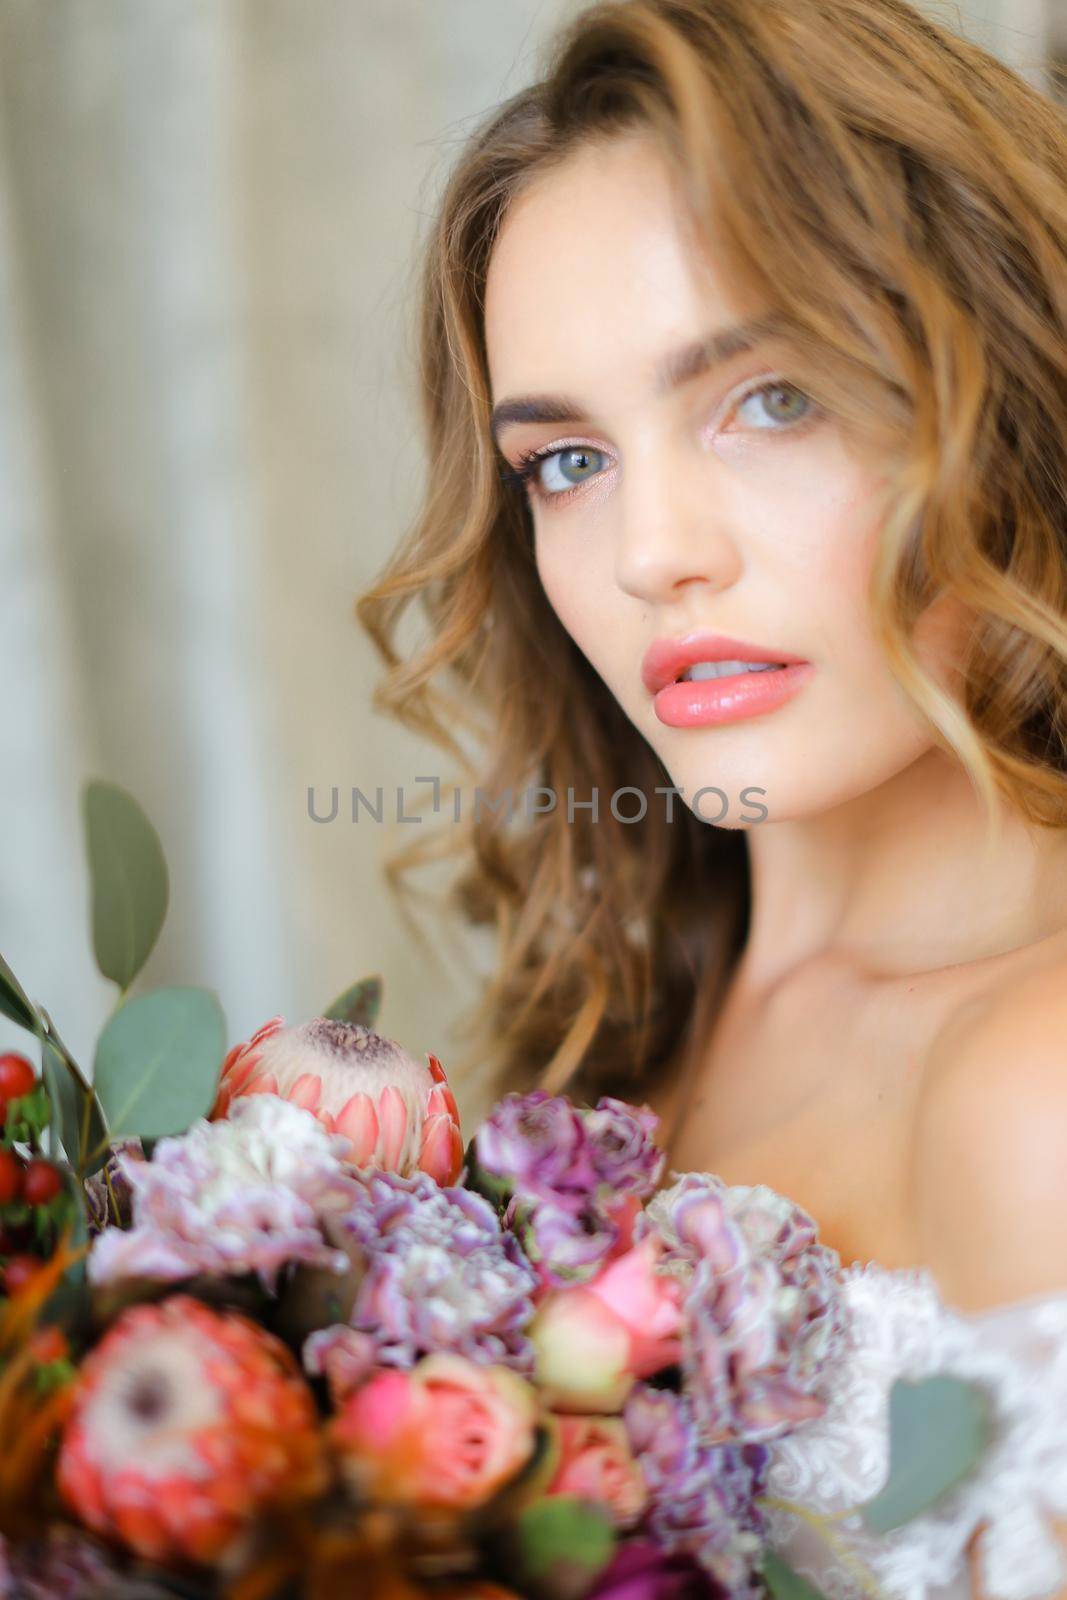 Close up portrait of charming bride with bouquet of flowers at studio. Concept of floristic art, beauty and beautiful wedding photo session.